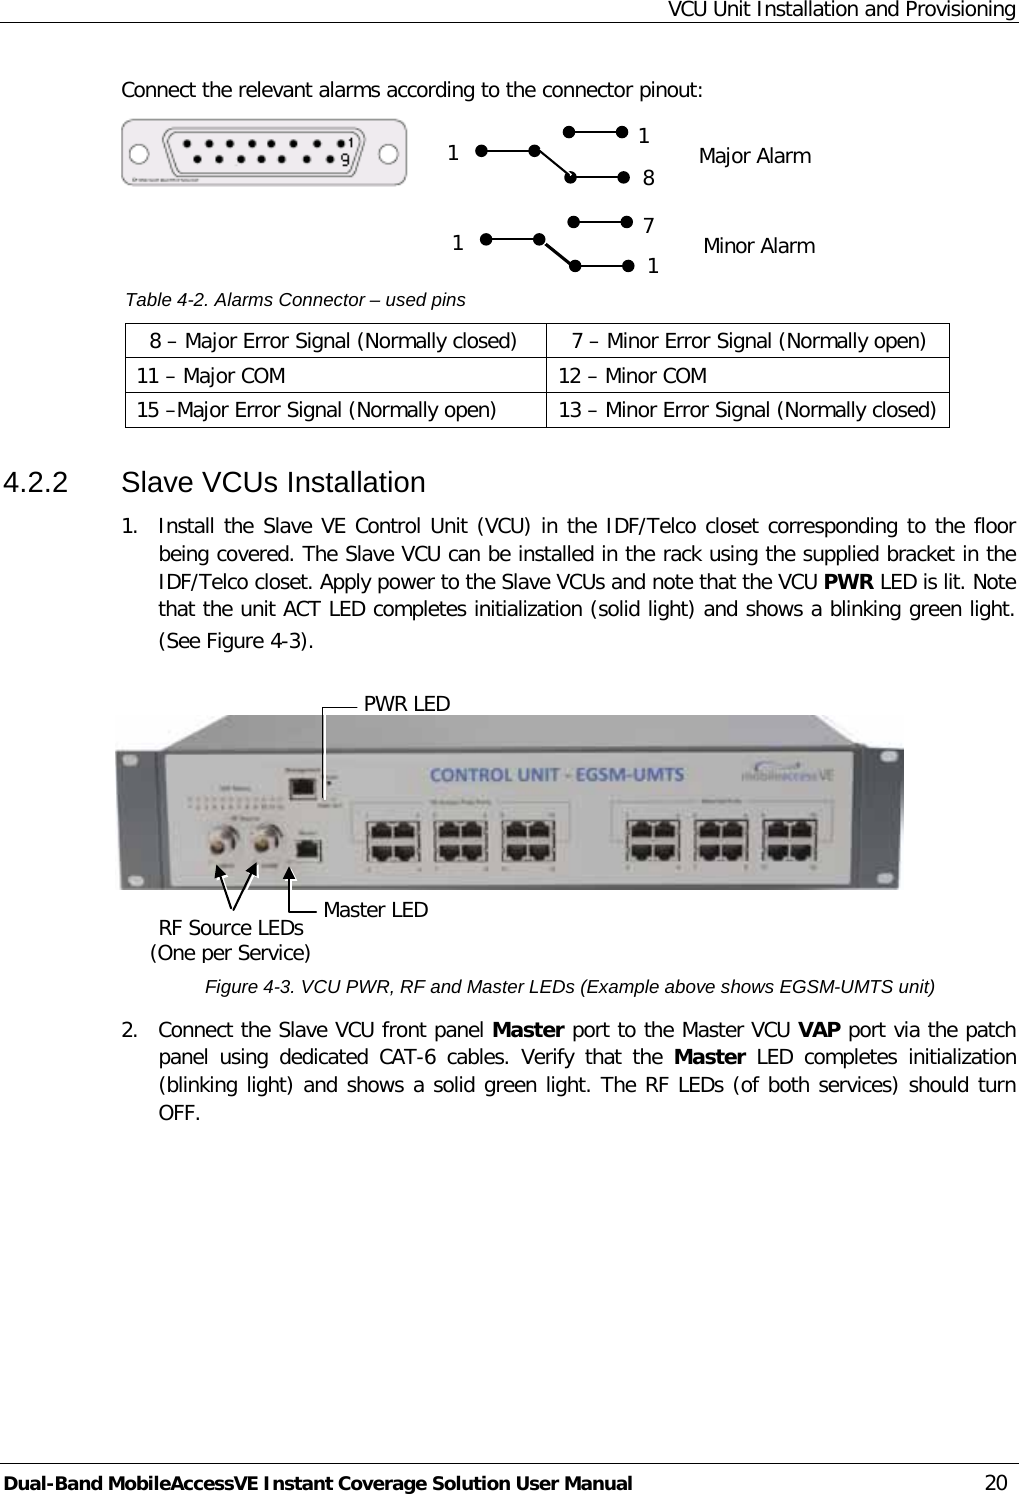 VCU Unit Installation and Provisioning Dual-Band MobileAccessVE Instant Coverage Solution User Manual 20 Connect the relevant alarms according to the connector pinout:     Table  4-2. Alarms Connector – used pins   8 – Major Error Signal (Normally closed)   7 – Minor Error Signal (Normally open) 11 – Major COM  12 – Minor COM 15 –Major Error Signal (Normally open) 13 – Minor Error Signal (Normally closed) 4.2.2  Slave VCUs Installation 1.  Install the Slave VE Control Unit (VCU) in the IDF/Telco closet corresponding to the floor being covered. The Slave VCU can be installed in the rack using the supplied bracket in the IDF/Telco closet. Apply power to the Slave VCUs and note that the VCU PWR LED is lit. Note that the unit ACT LED completes initialization (solid light) and shows a blinking green light. (See Figure  4-3).           Figure  4-3. VCU PWR, RF and Master LEDs (Example above shows EGSM-UMTS unit) 2.  Connect the Slave VCU front panel Master port to the Master VCU VAP port via the patch panel  using dedicated CAT-6 cables. Verify that the Master LED completes initialization (blinking light) and shows a solid green light. The RF LEDs (of both services) should turn OFF.  PWR LED   Master LED  RF Source LEDs  (One per Service) 1 1 8  Major Alarm 1 7 1 Minor Alarm 